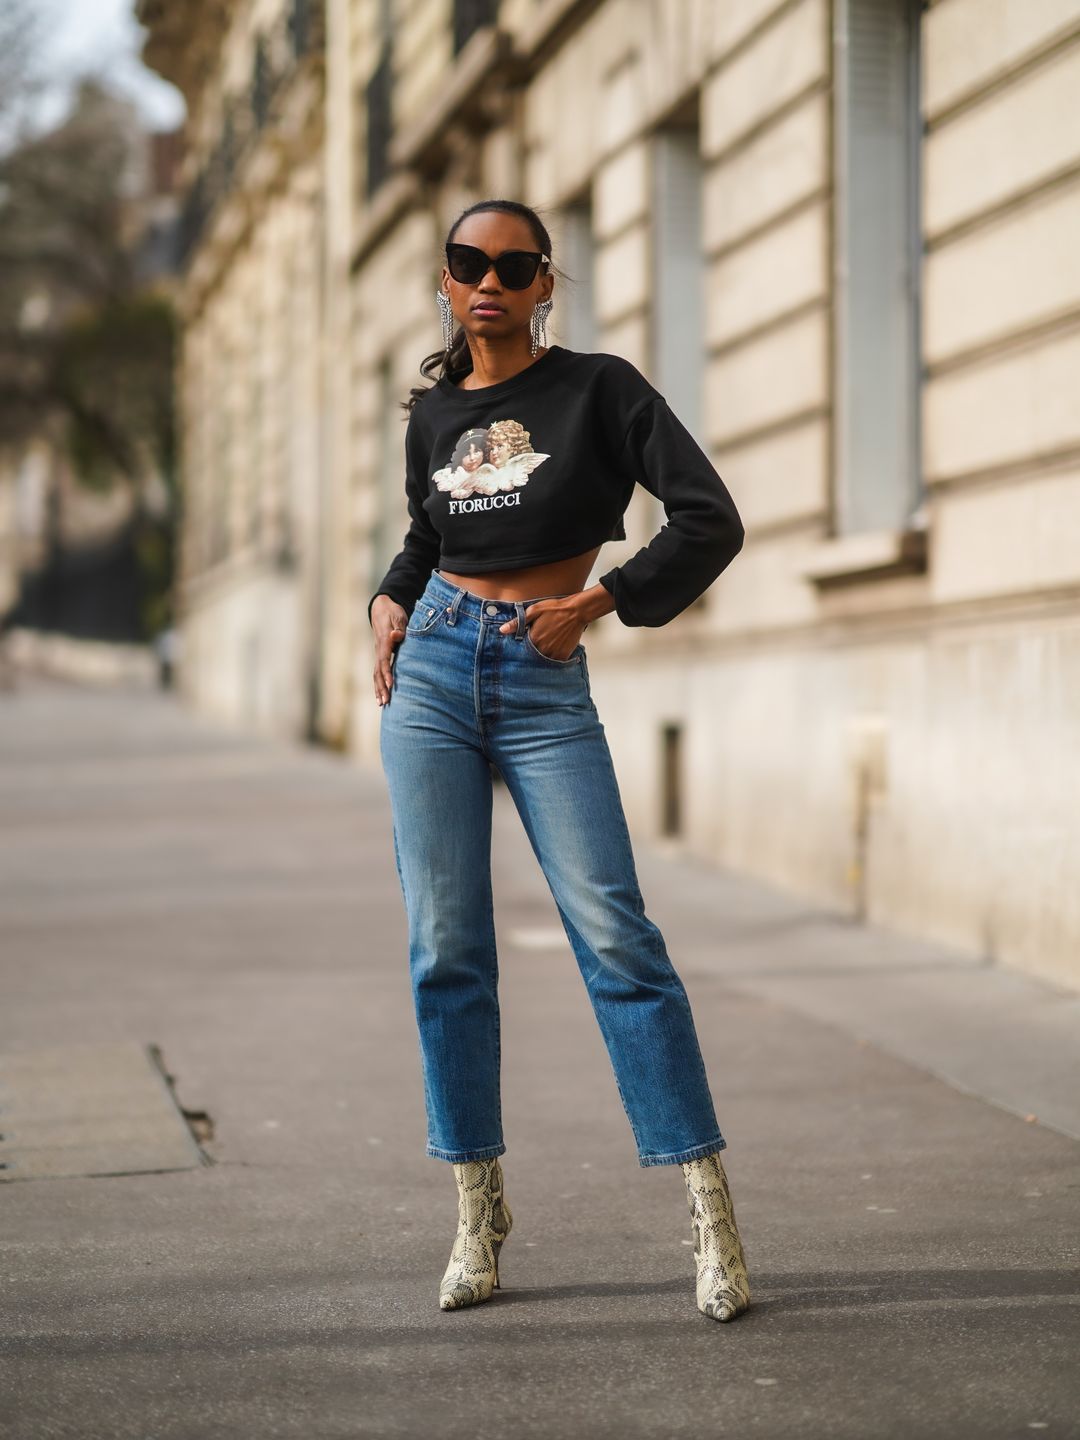 Emilie Joseph wears sunglasses, Isabel Marant bejeweled long earrings, a cropped black pullover with printed angels from Fiorucci, blue ribcage Levi's denim jeans, white high heels pointy ankle boots with snake print from Paris Texas, on February 16, 2021 in Paris, France. (Photo by Edward Berthelot/Getty Images)